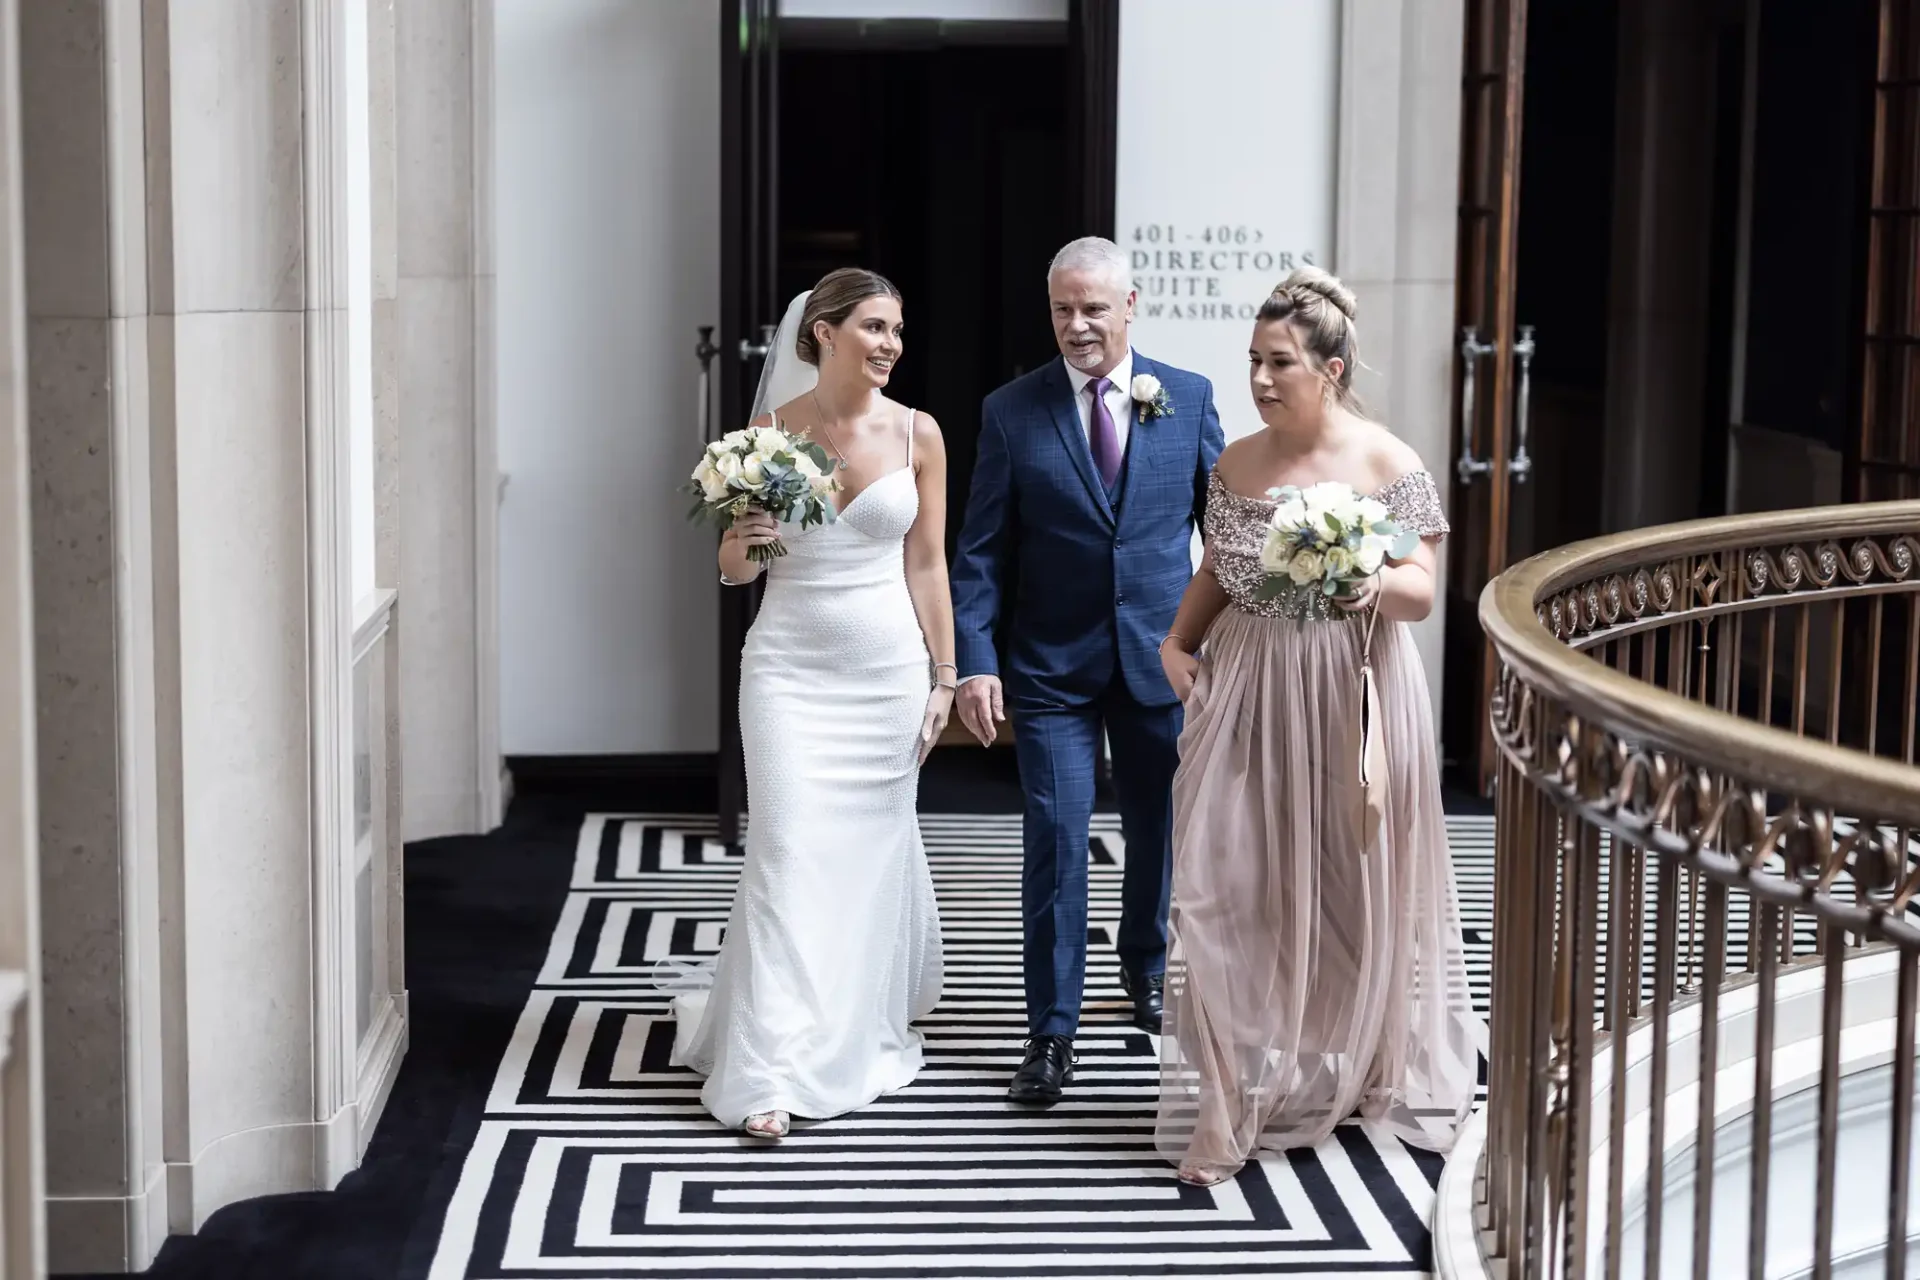 A bride in a white dress walks with her father and a bridesmaid in a beige dress down a corridor with a geometric carpet design.